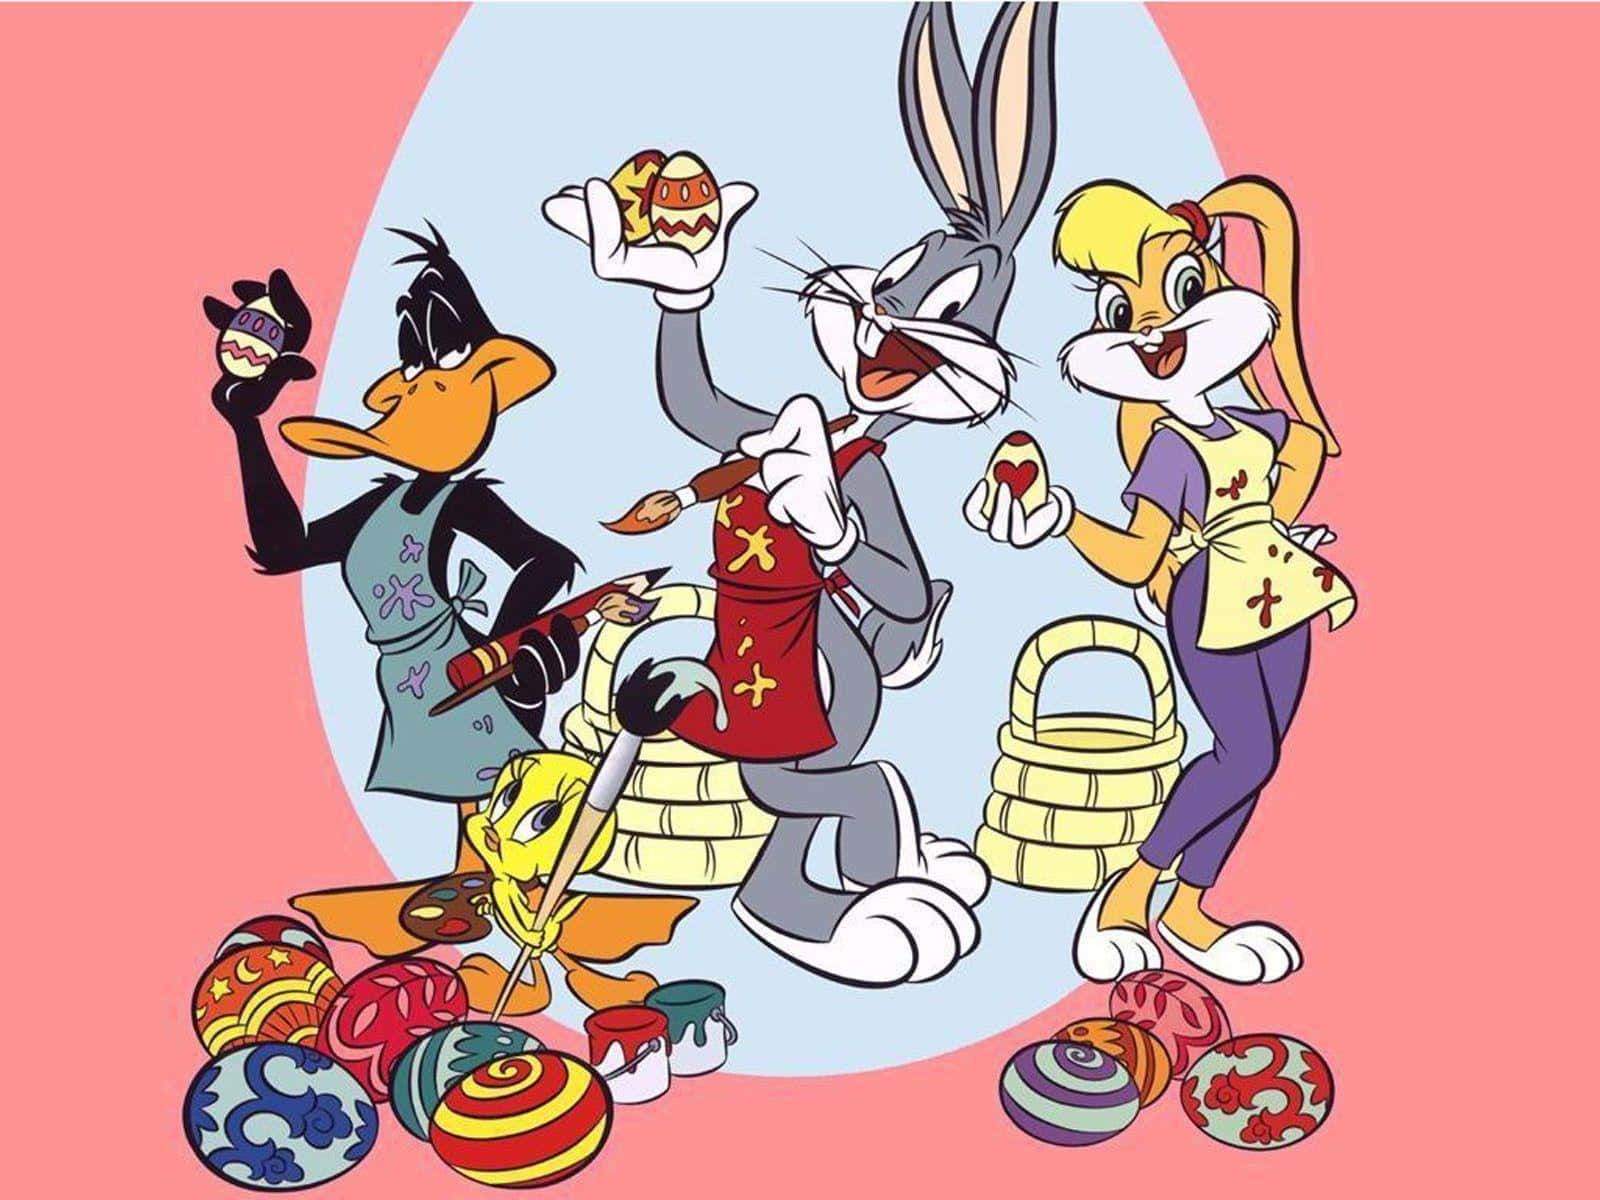 Join the Looney Tunes gang!